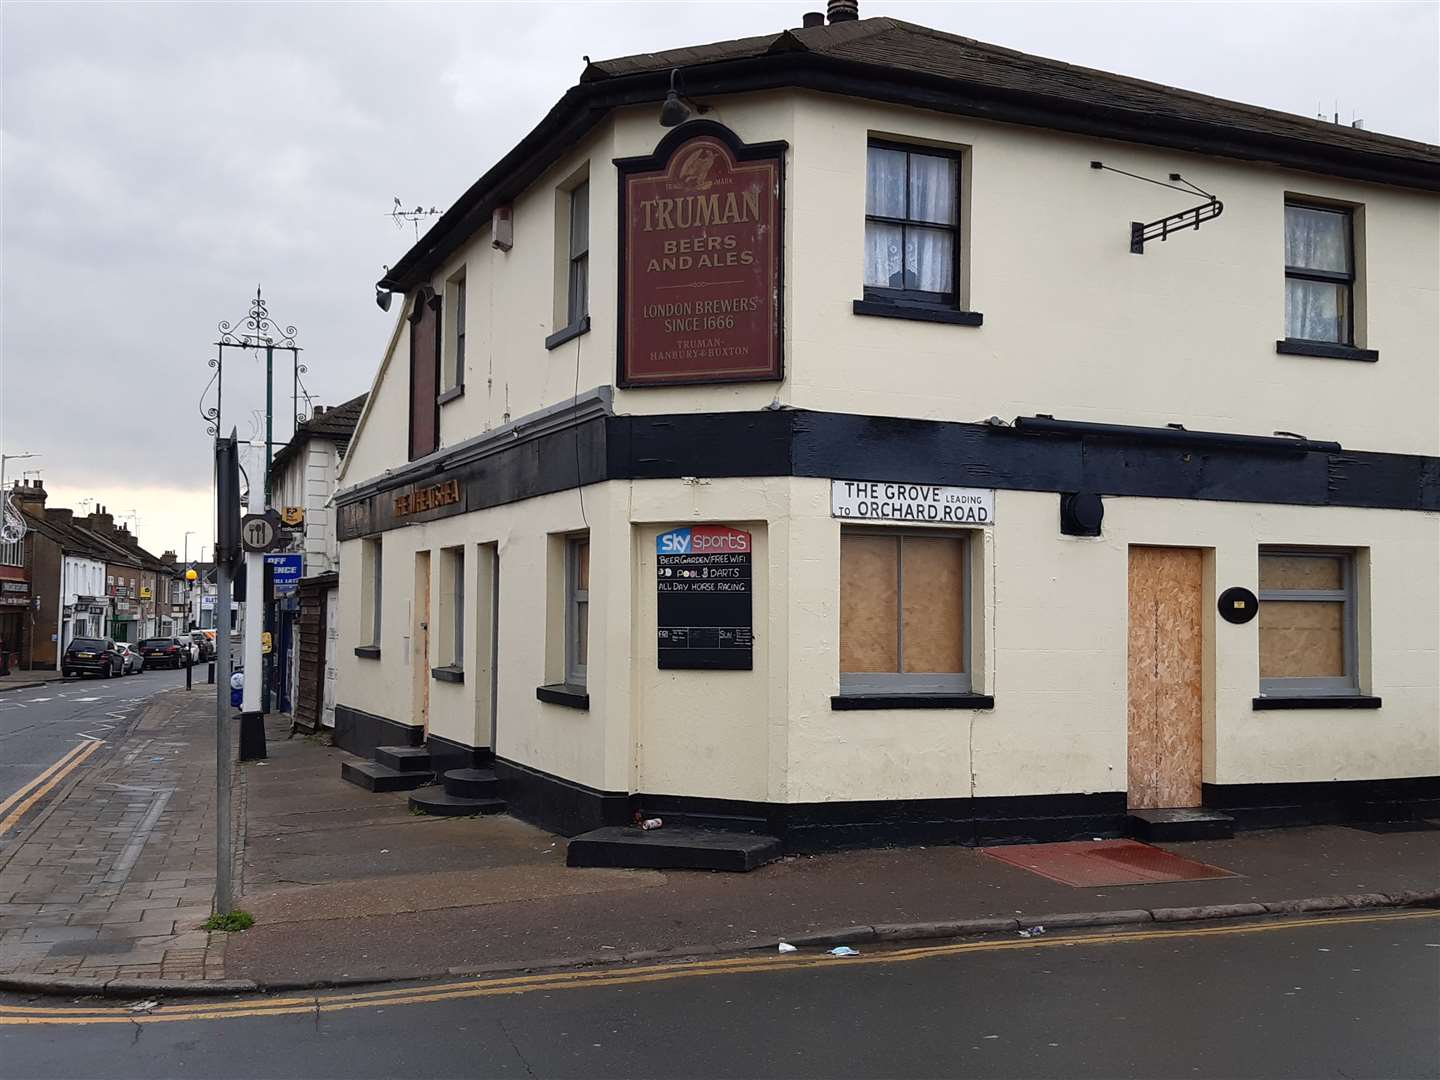 The Wheatsheaf pub in Swanscombe High Street has sat vacant for some time